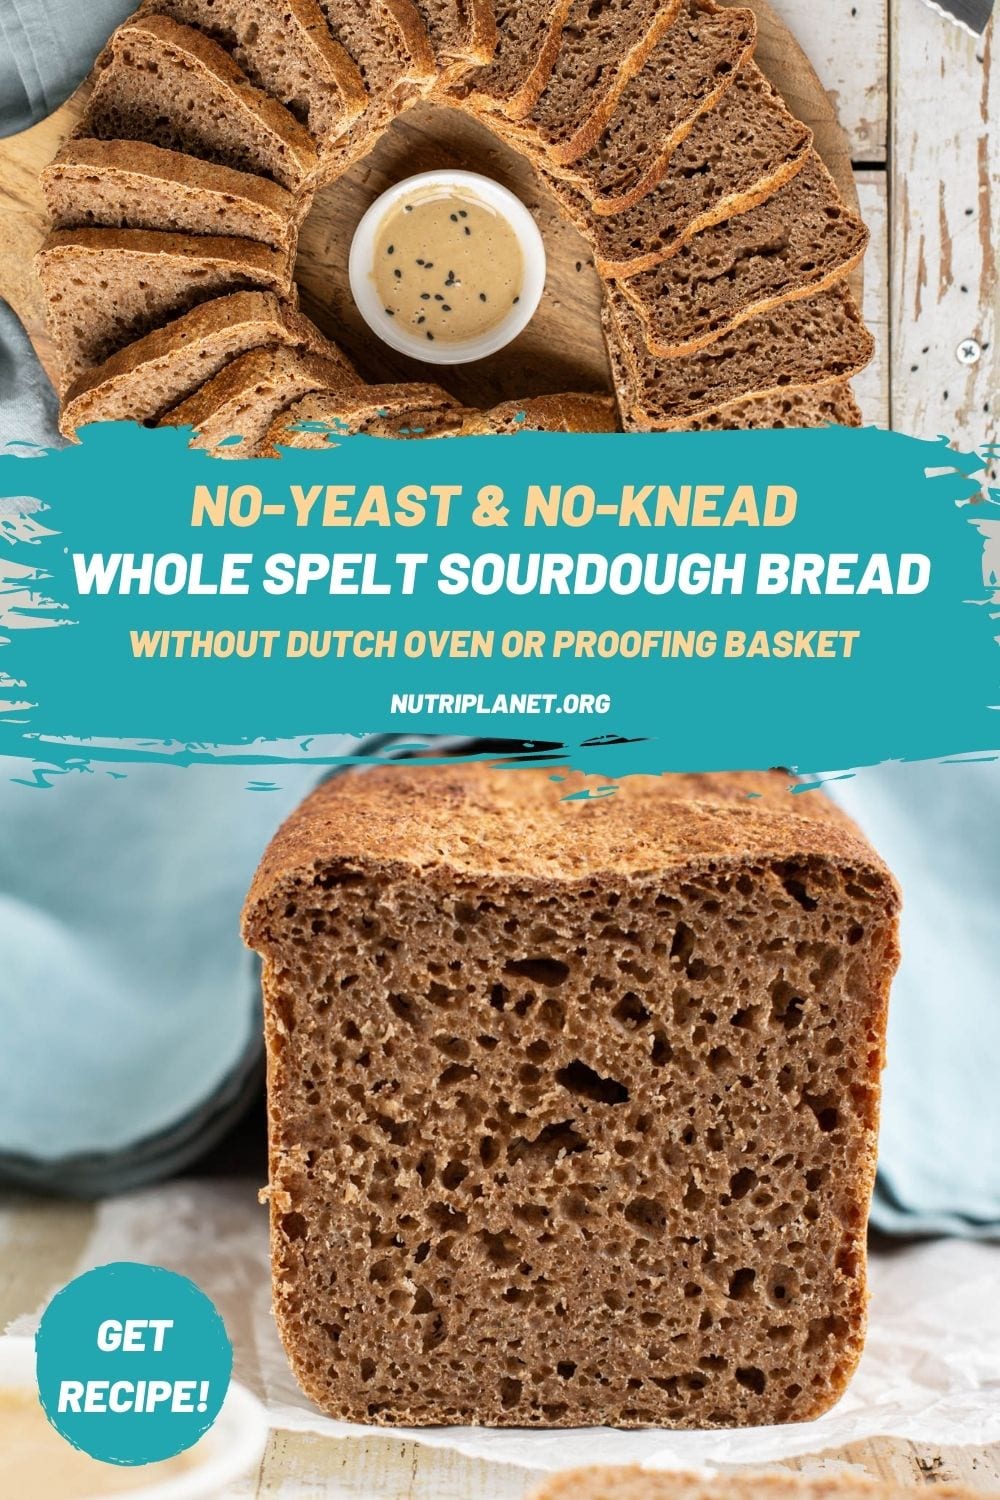 Learn how to make no-knead whole grain spelt sourdough bread with simple equipment in only 8 hours.